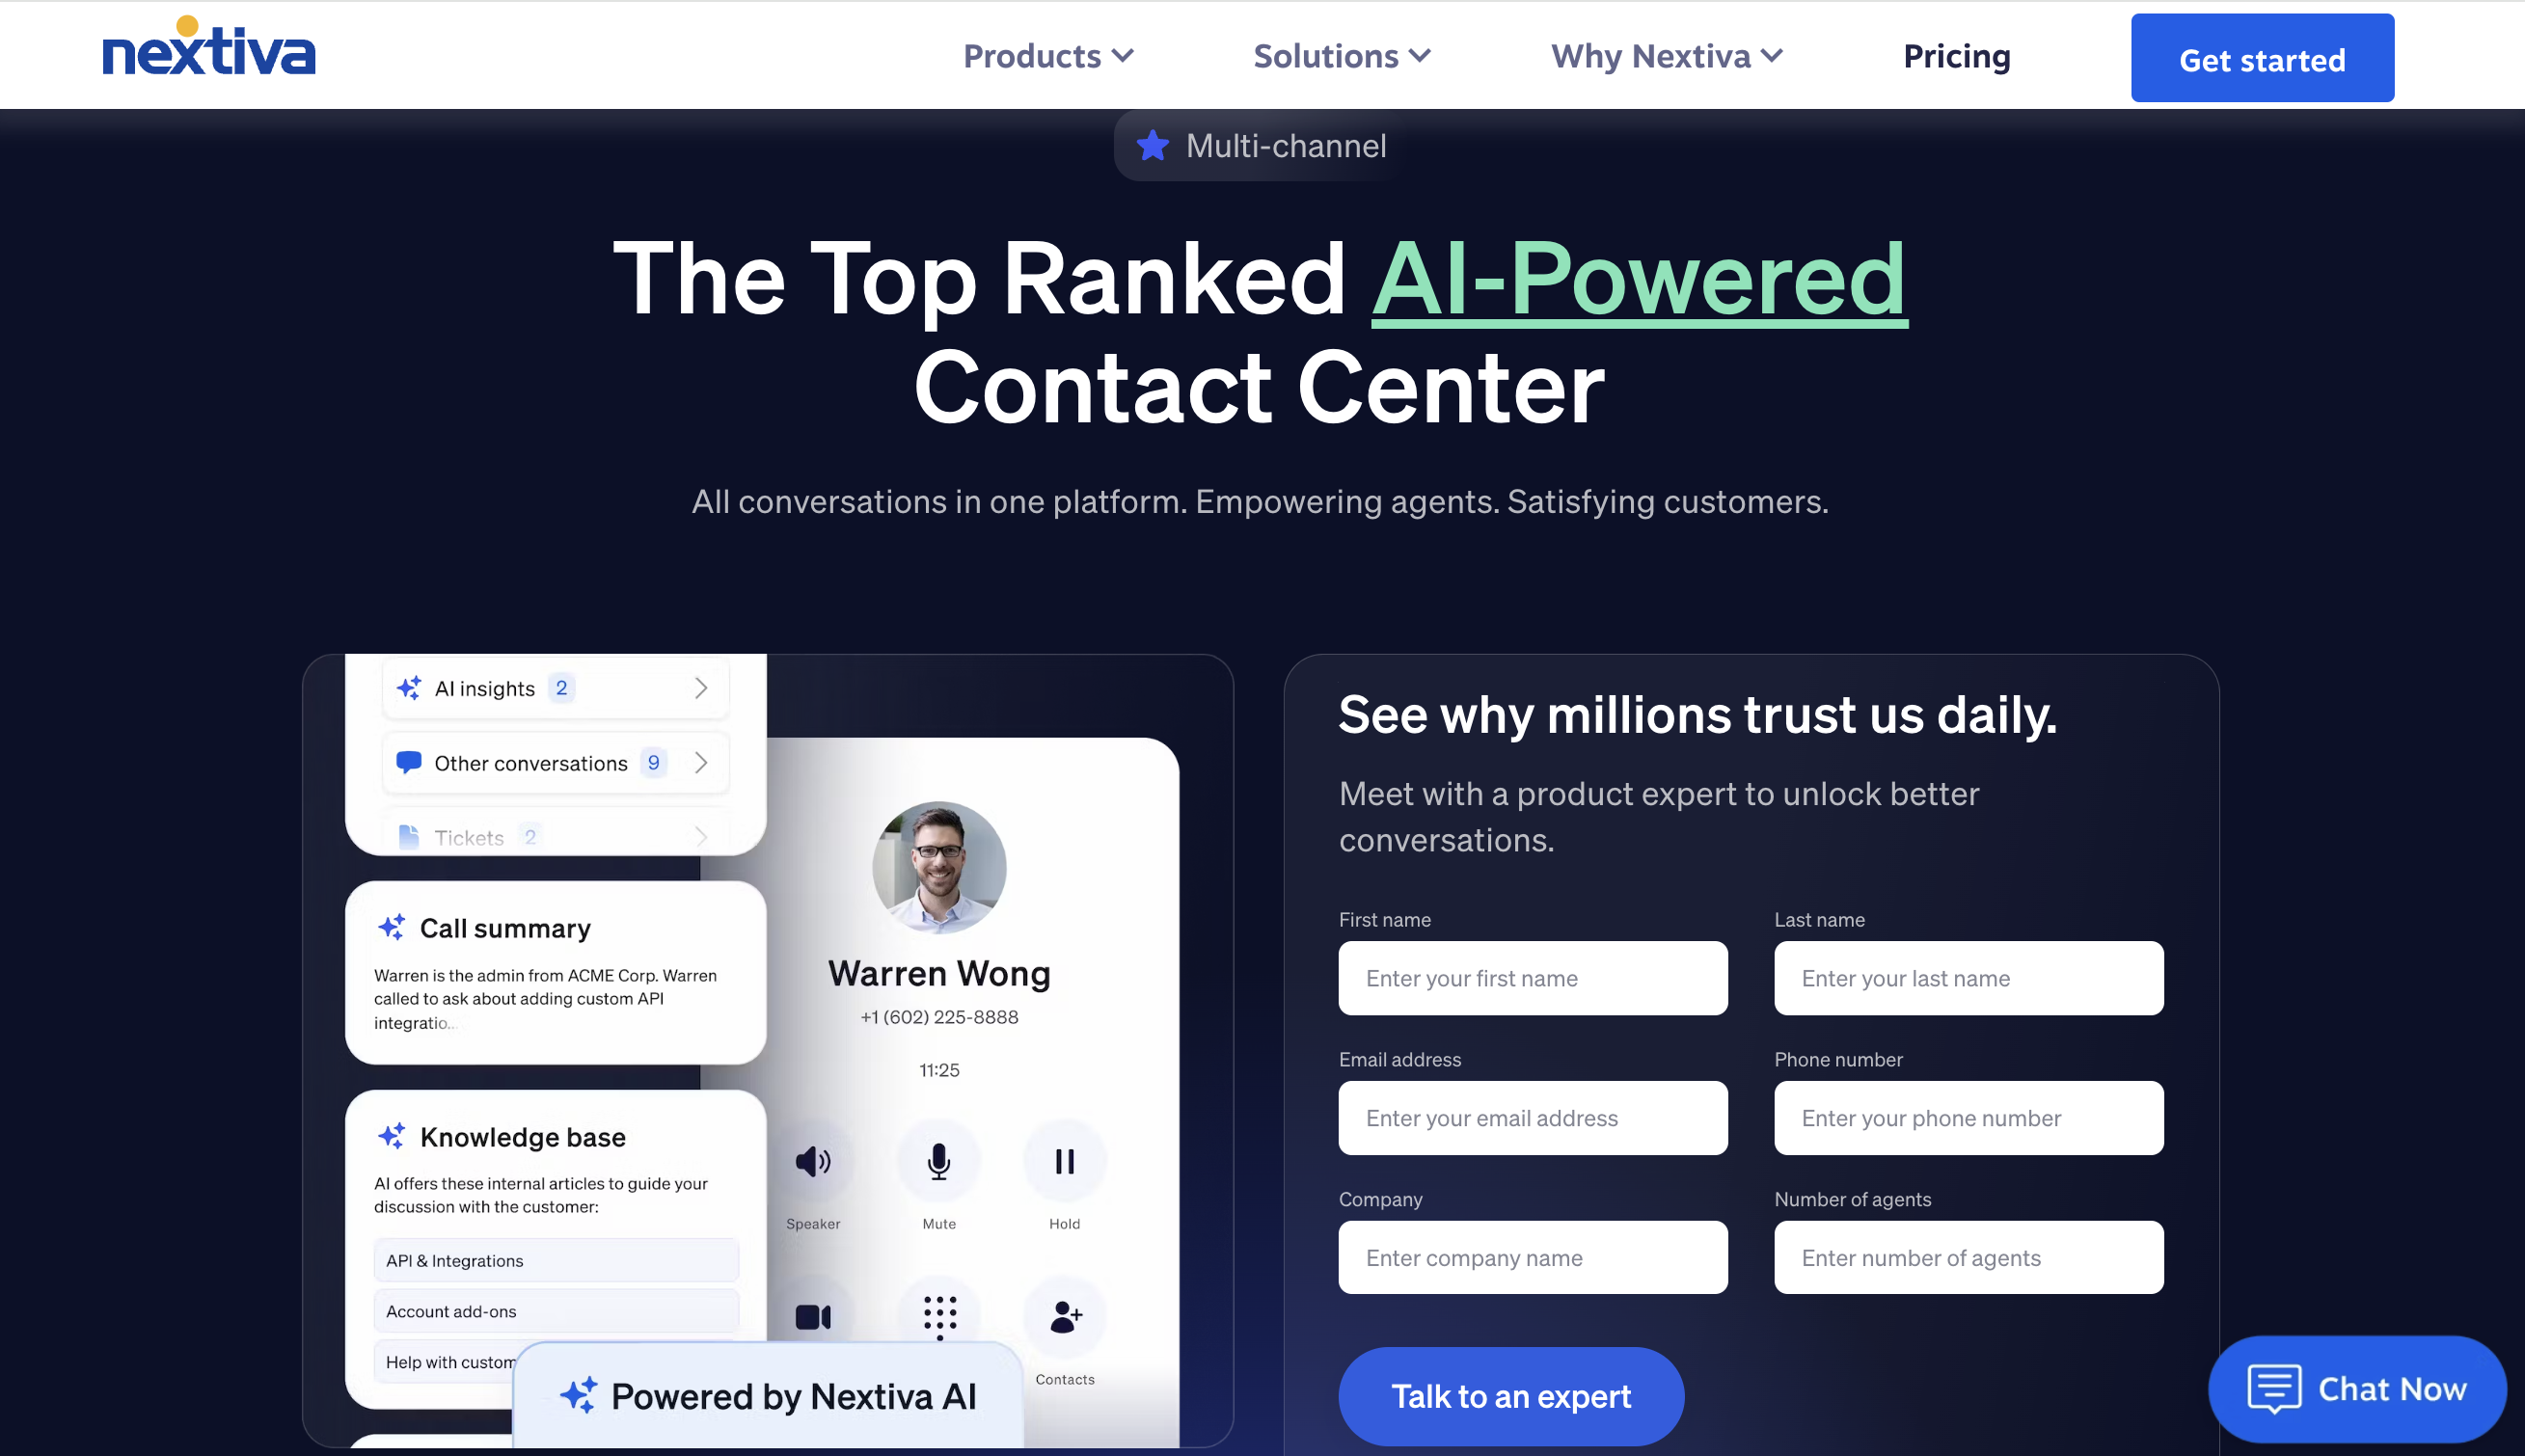 The top ranked AI-Powered contact center